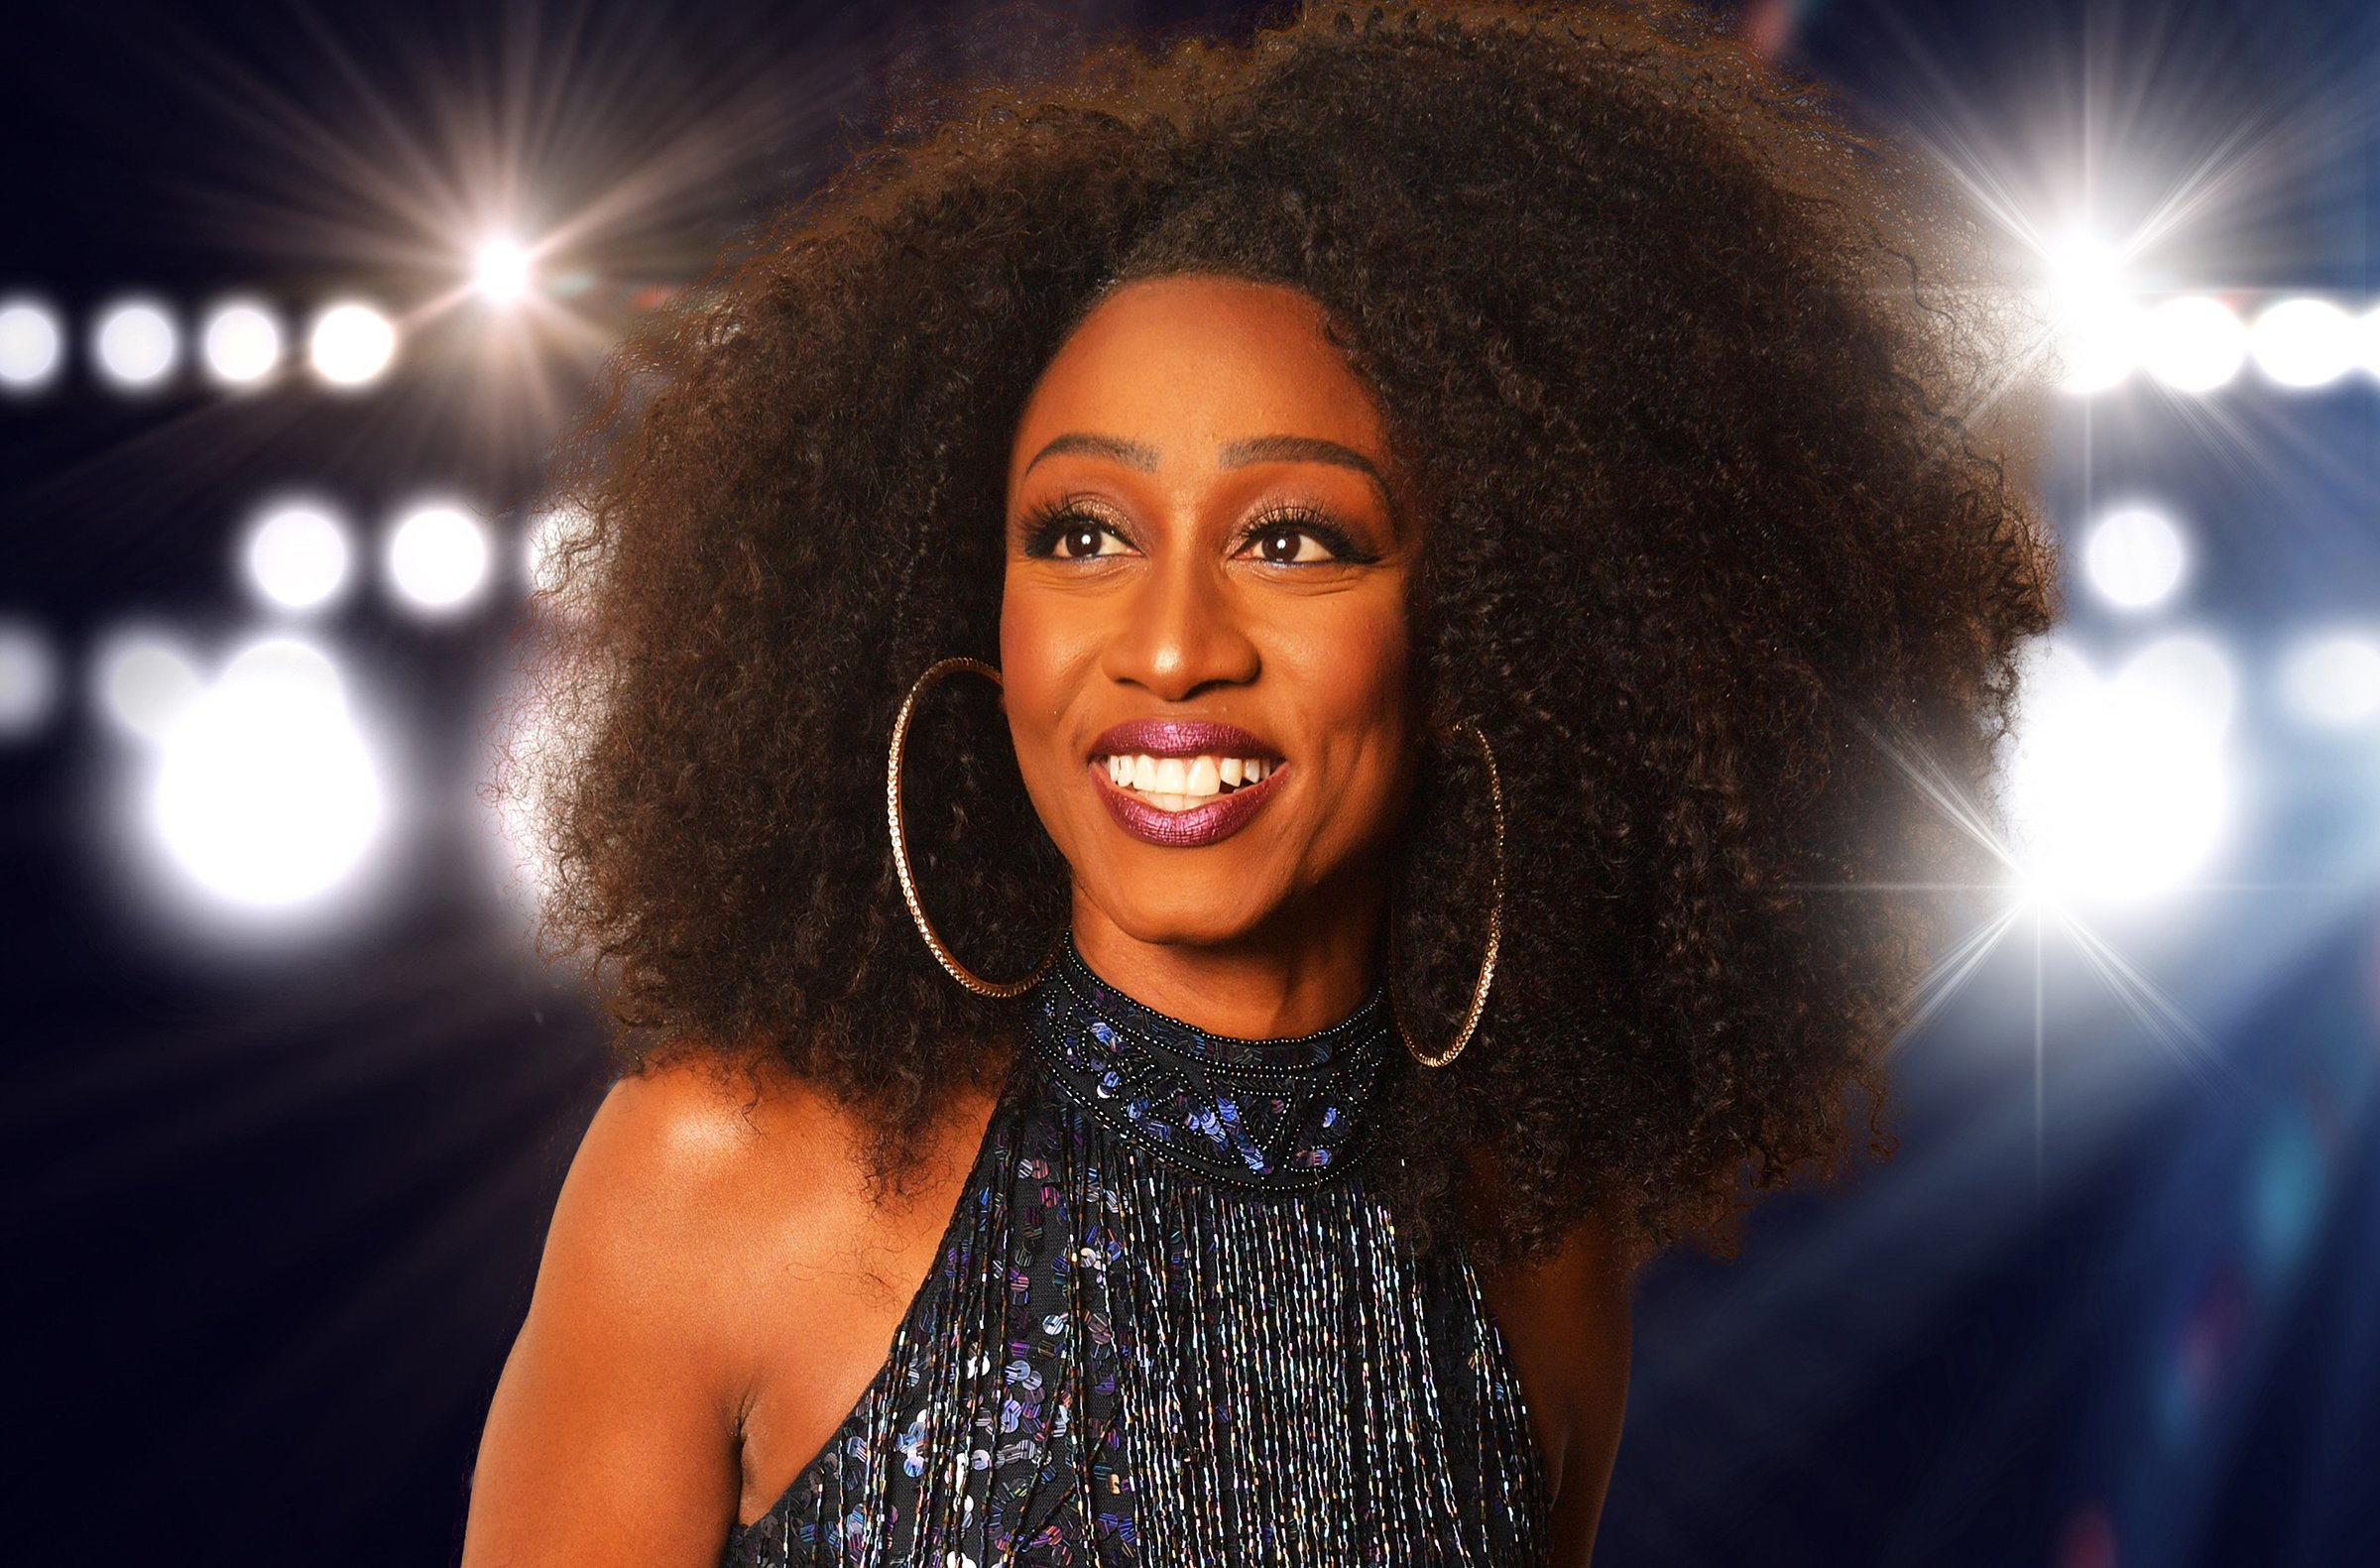 LIVE REVIEW: Beverley Knight at Camden Roundhouse, London 